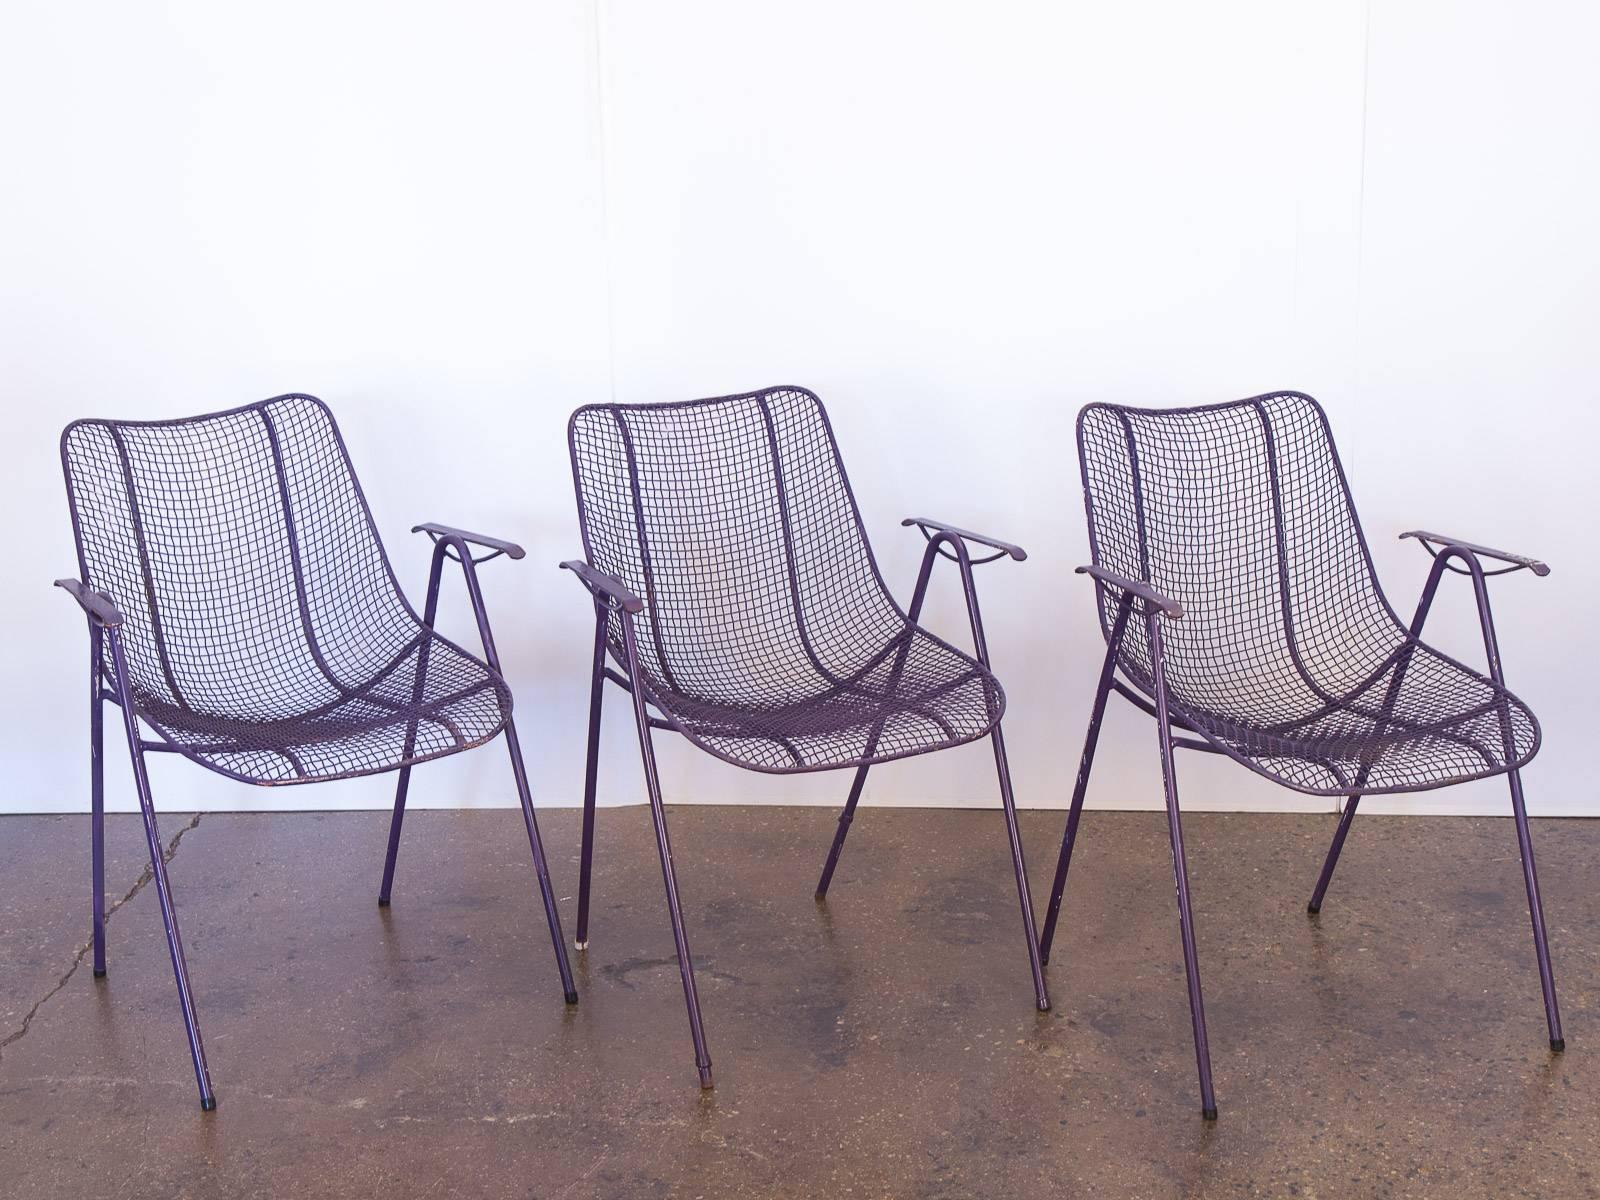 Set of six purple outdoor iron mesh armchairs by Russell Woodard. These stylish Industrial modern, weather resistant patio chairs stack on top of each other for easy storing. Each chair has varying degrees of age-appropriate wear, leaving a charming